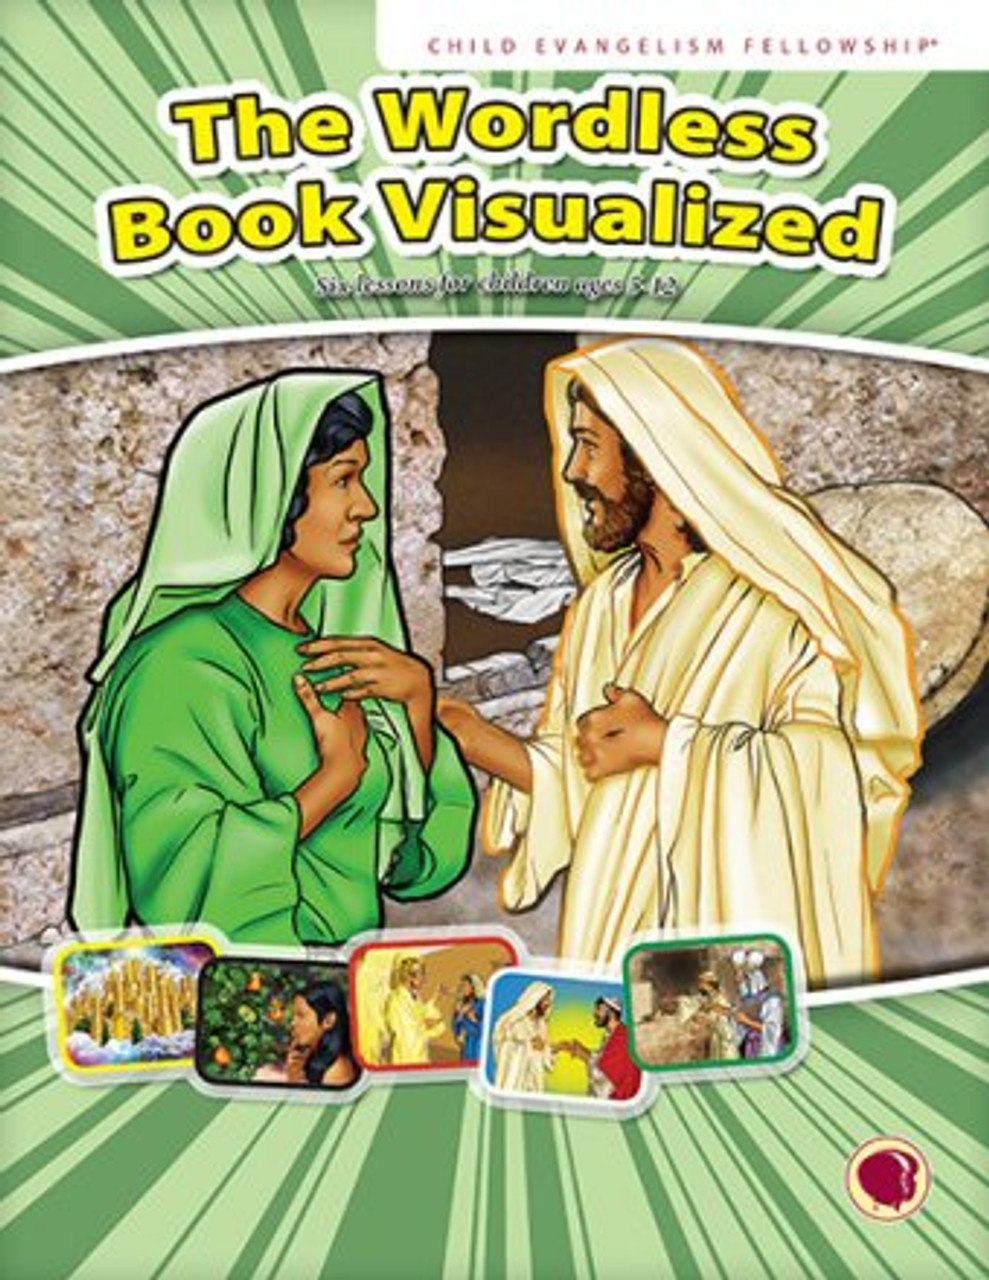 The Wordless Book Visualized 2019 (teachers manual)